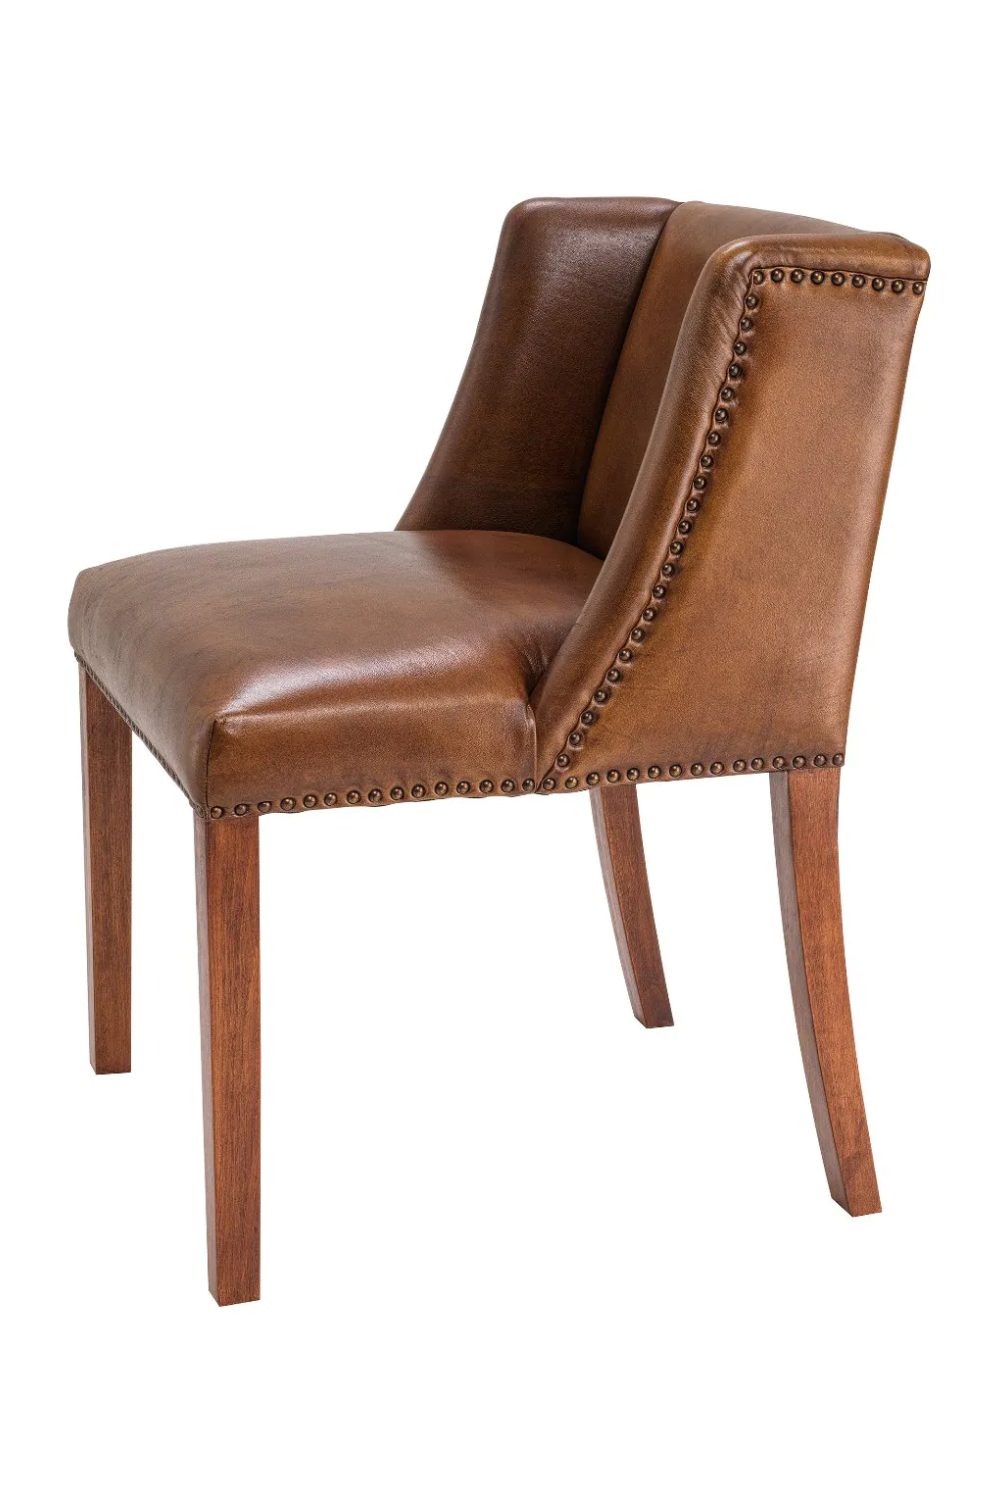 Tobacco Leather Dining Chair | Eichholtz St. James | Oroa.com